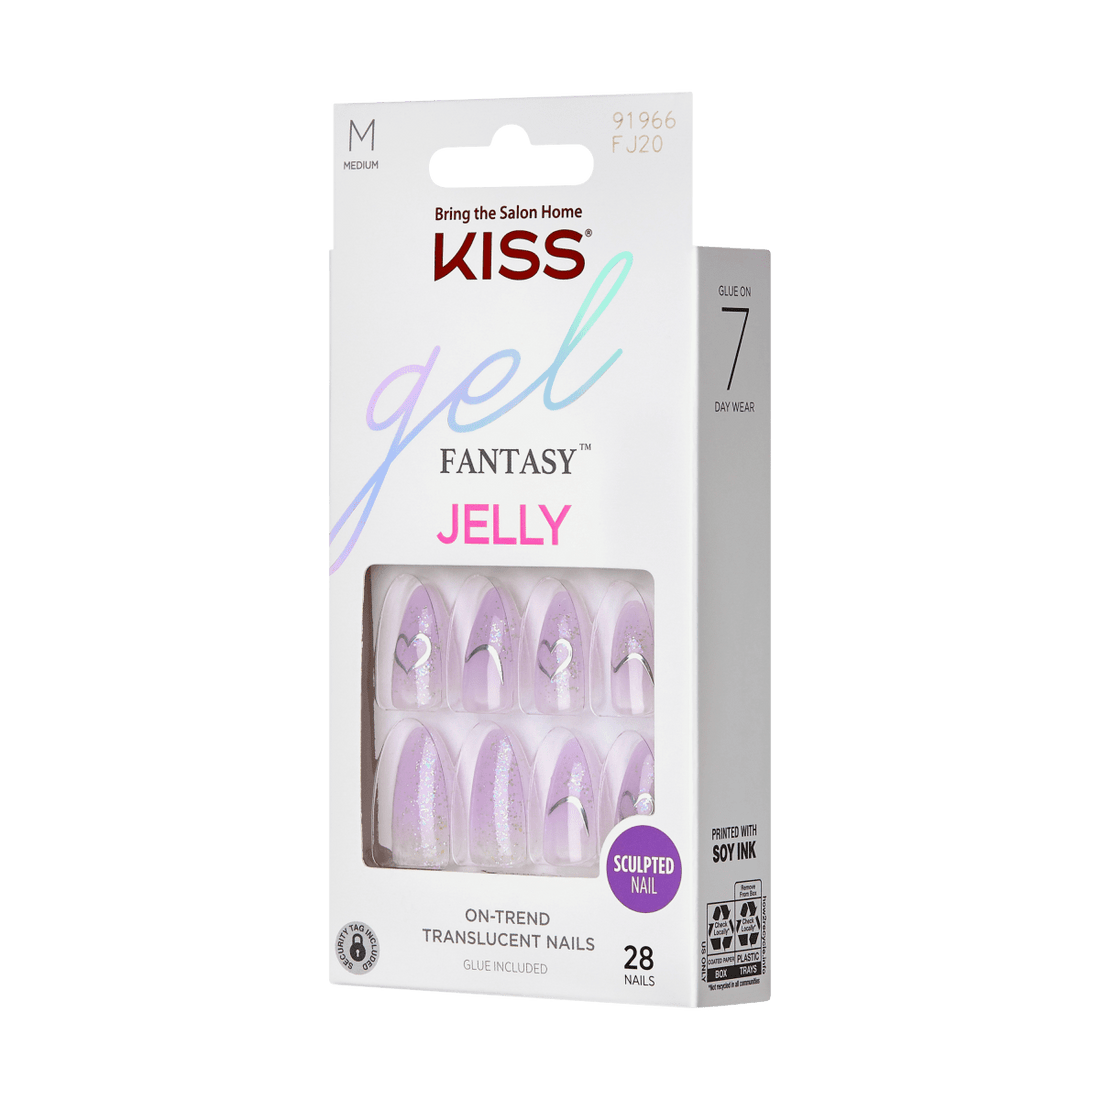 KISS Gel Fantasy Jelly Nails- One Day Jelly